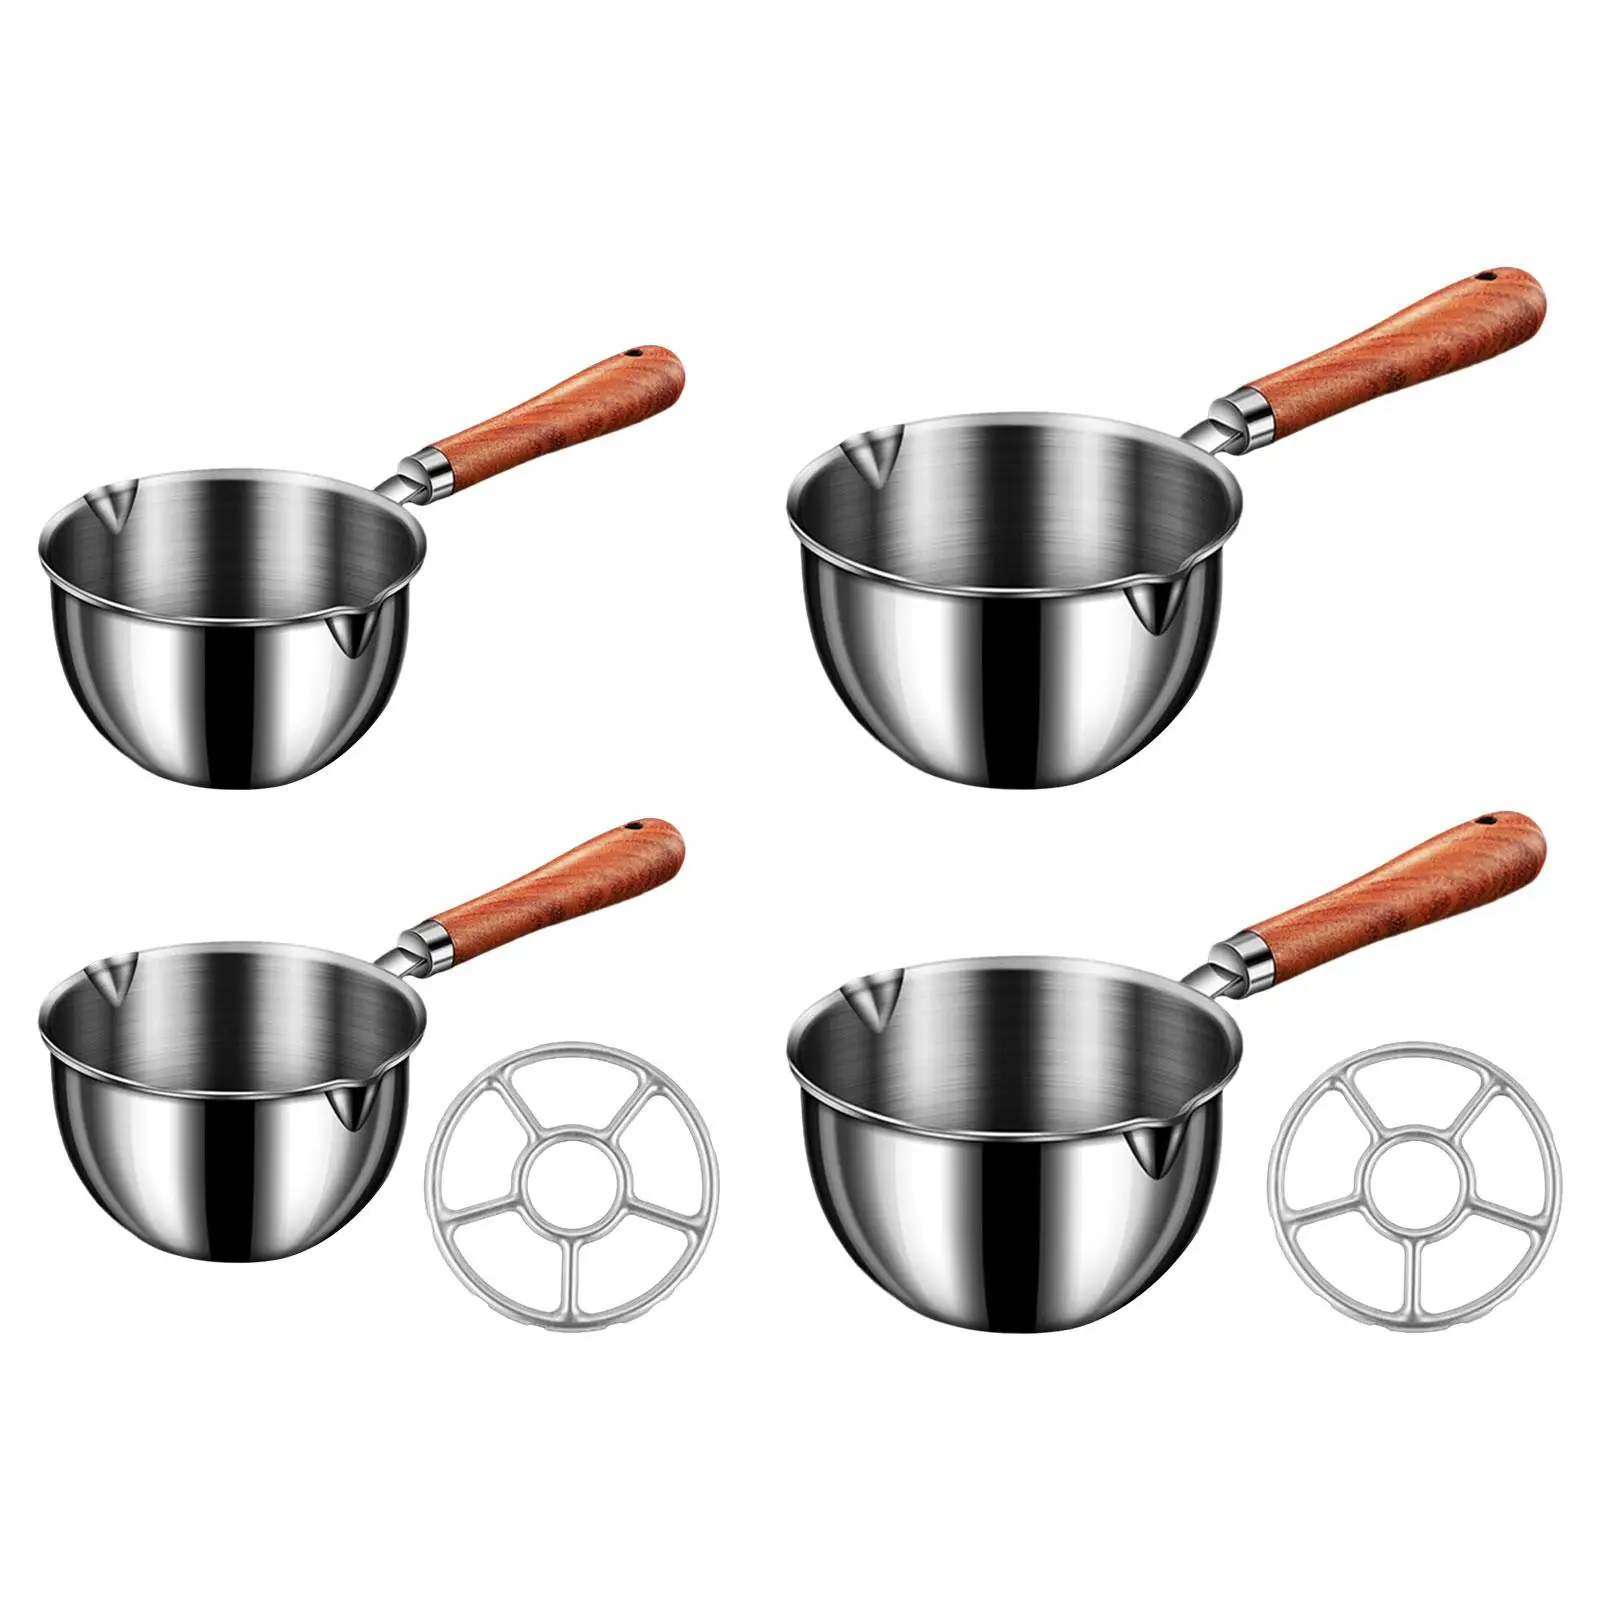 Universal Saucepan Pot with Scale with Pour Spouts Multifunctional Condiment Sauce Pan Small Soup Pot for Chocolate Melting